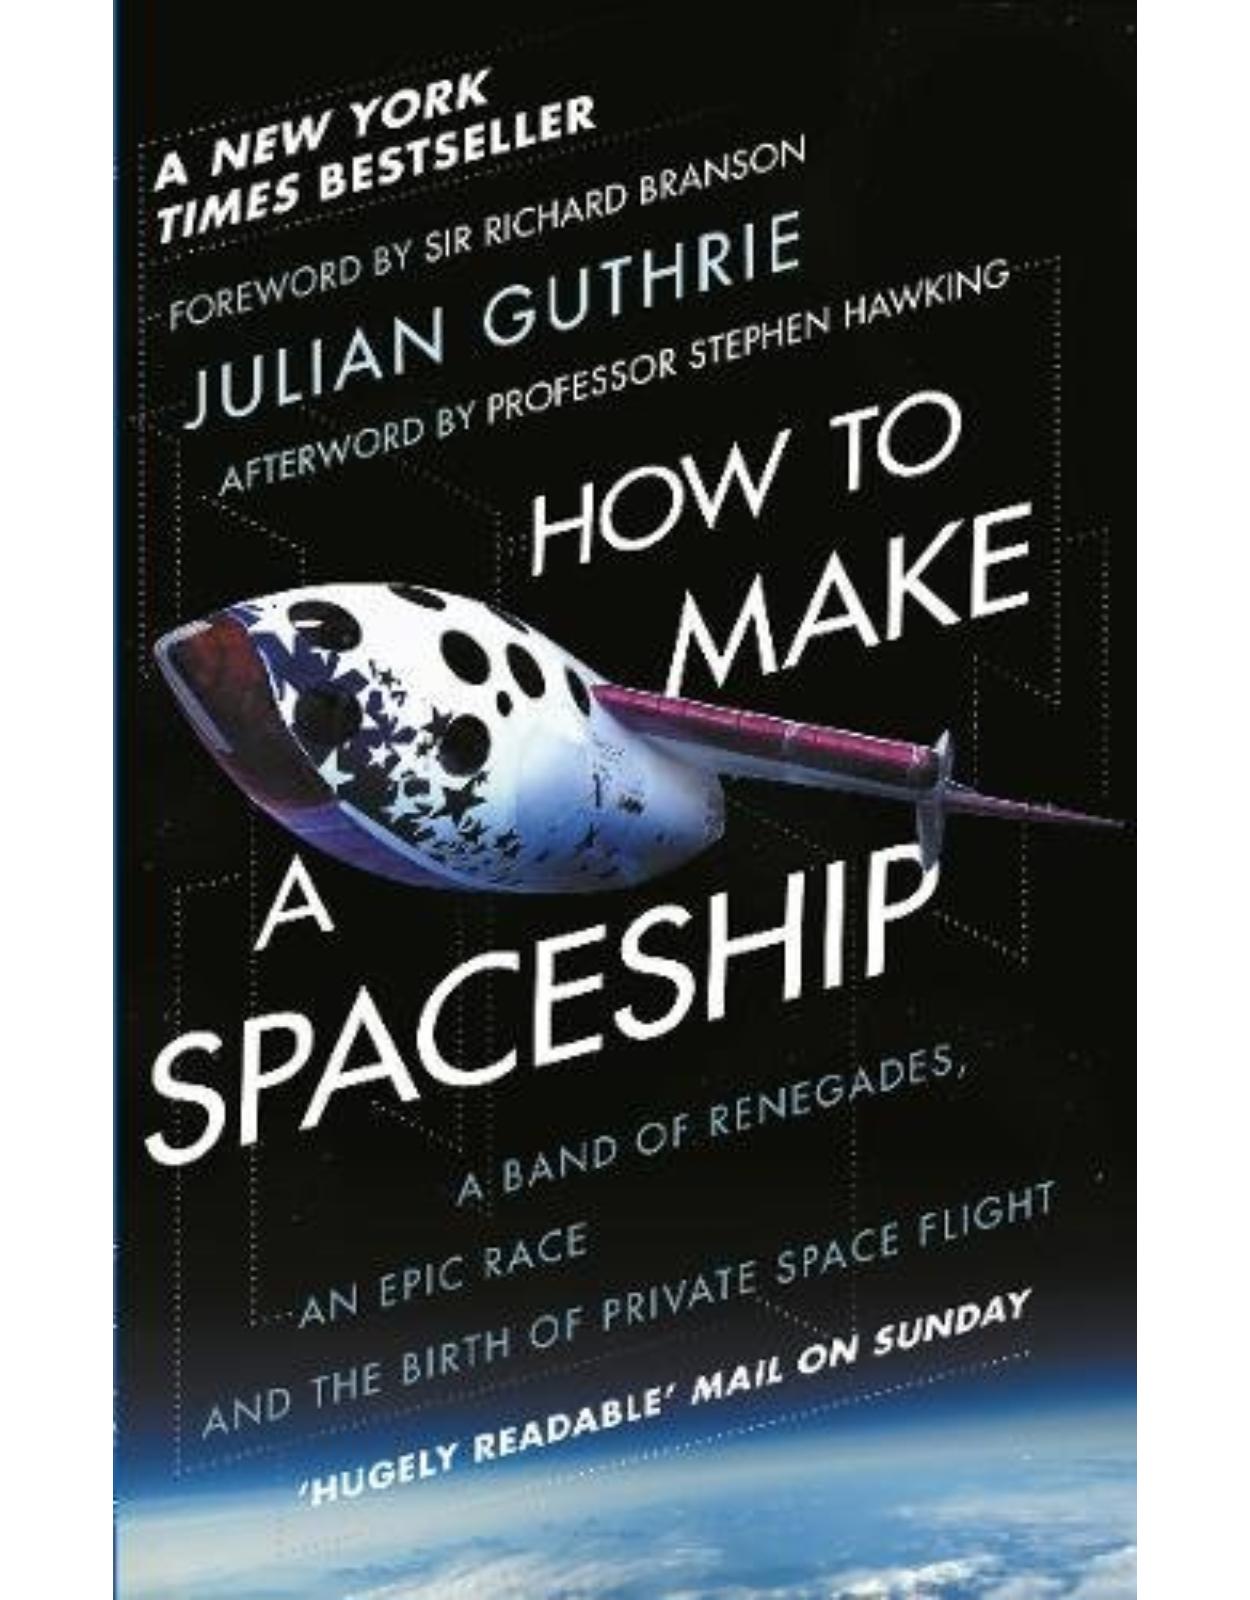 How to Make a Spaceship: A Band of Renegades, an Epic Race and the Birth of Private Space Flight